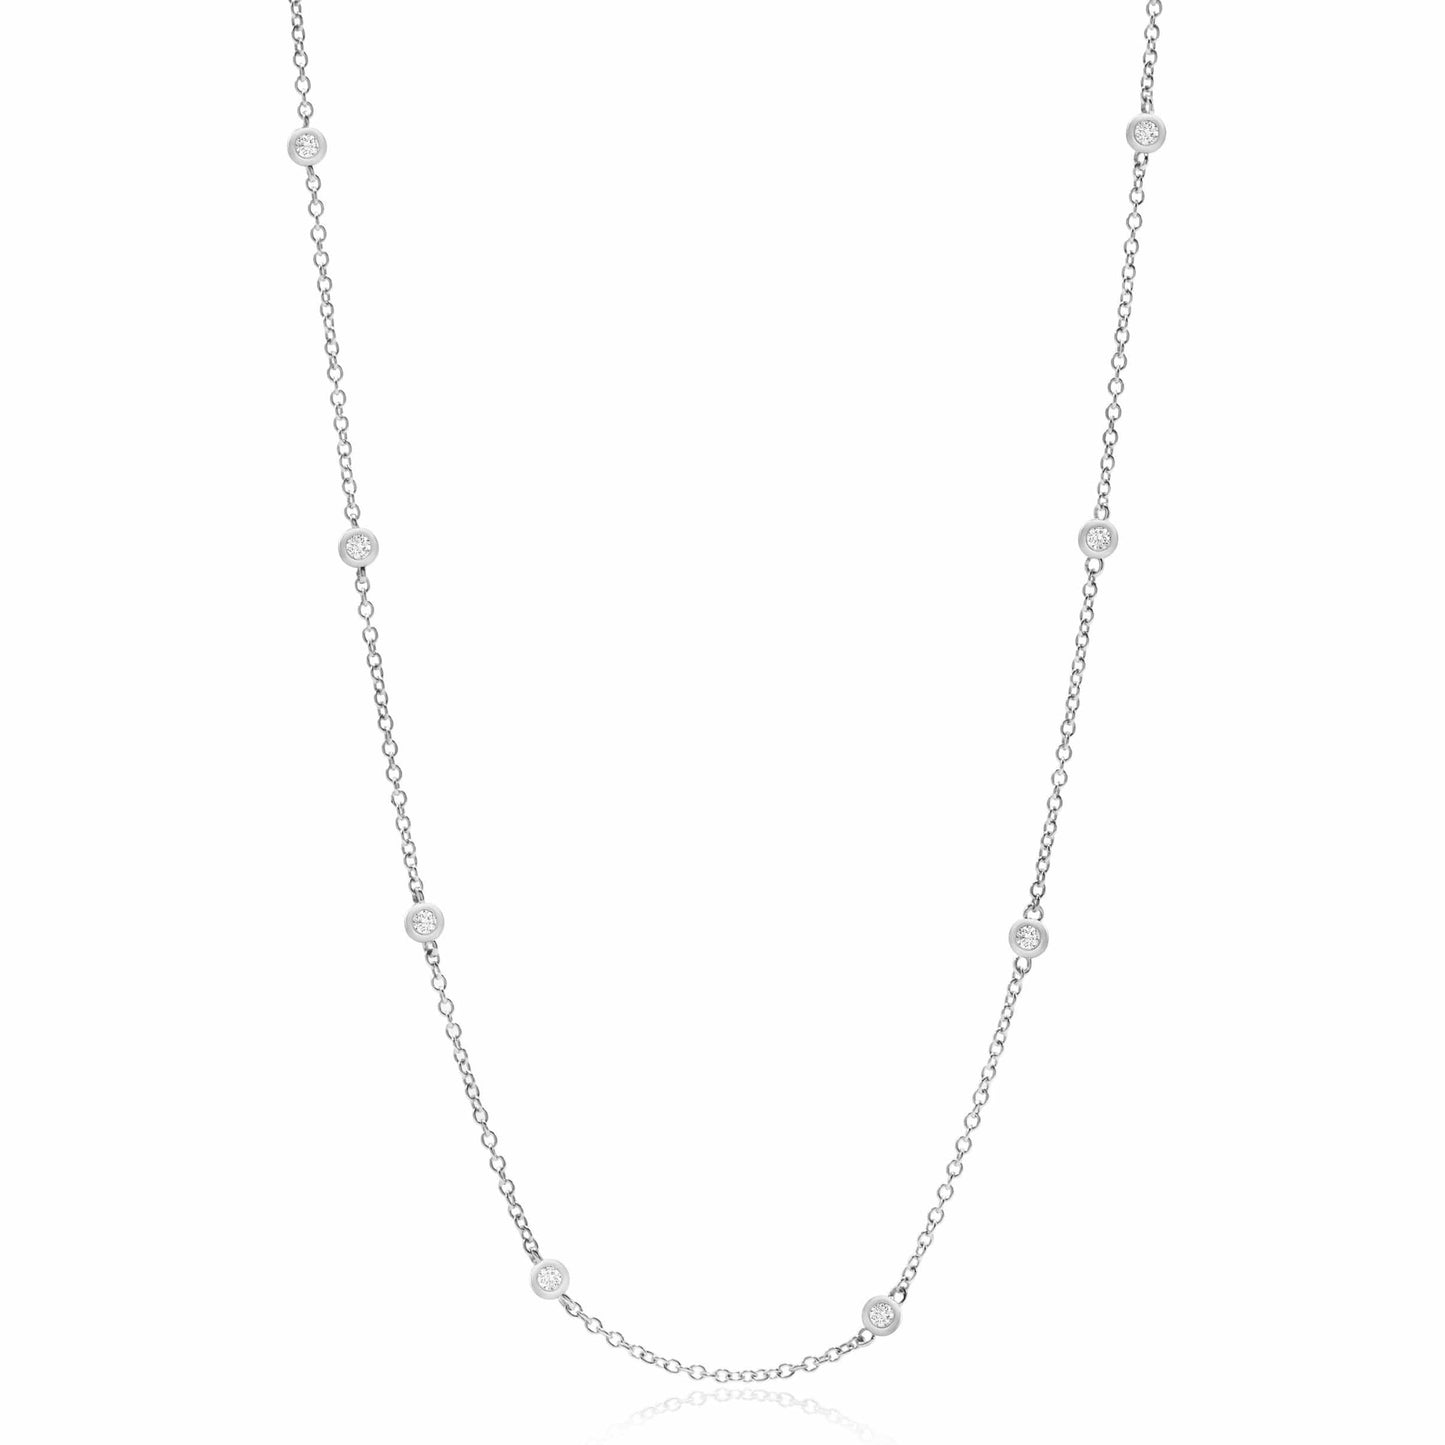 Dalia T Online Necklace Delicate Collection 14KT White Gold Diamonds Station Necklace